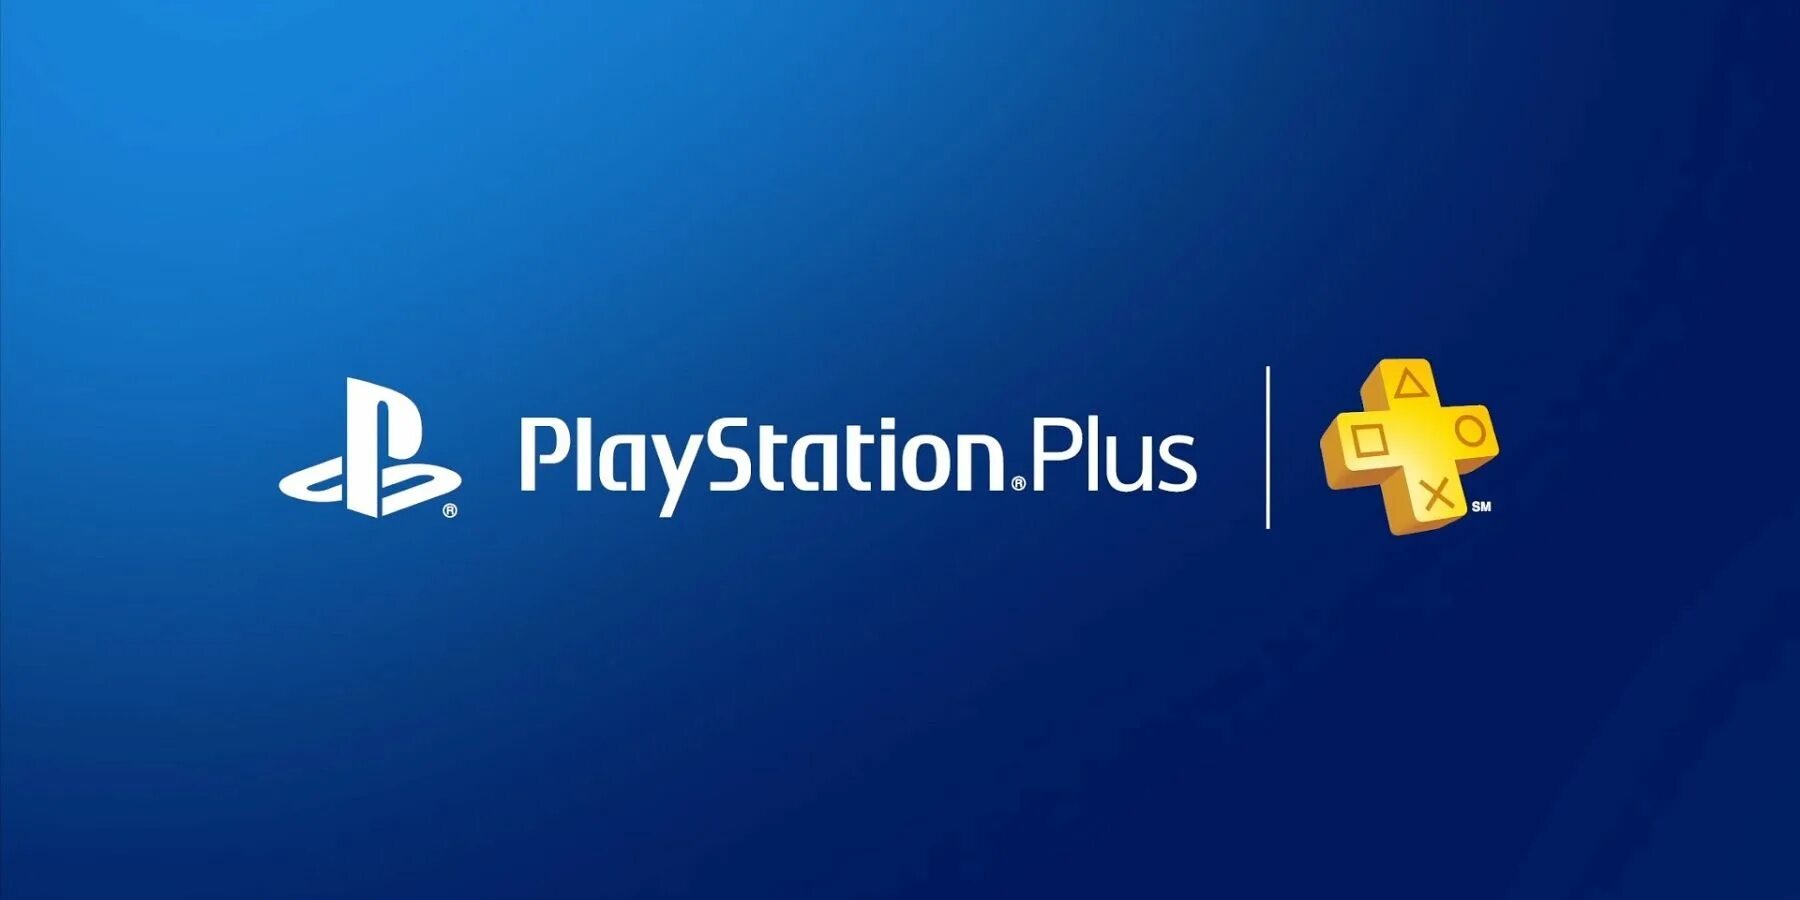 PS Plus ps5. Sony PLAYSTATION Plus для ps4. PLAYSTATION Plus Essential Extra Deluxe. PLAYSTATION Plus Extra & Premium. Playstation turkey ps plus